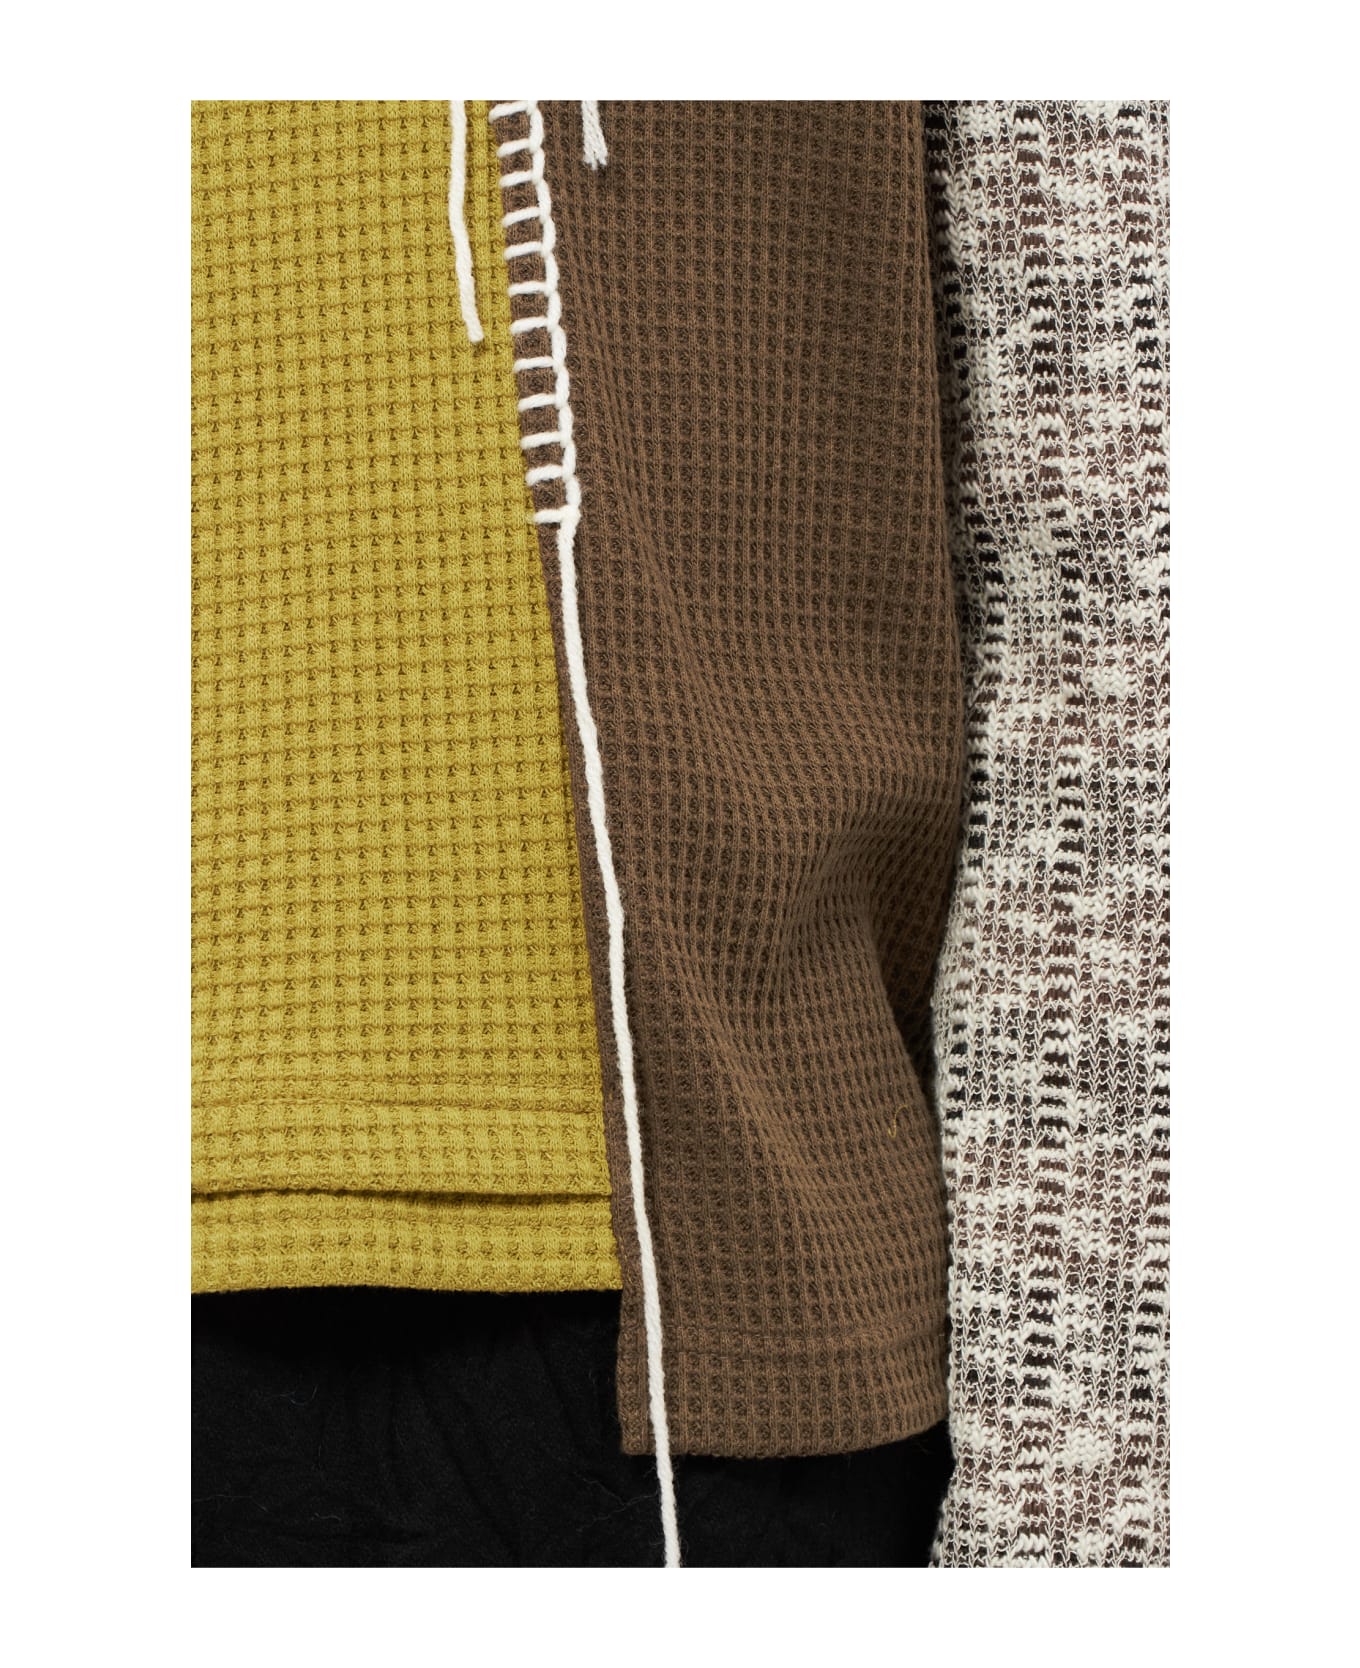 Andersson Bell Chatre Knitwear - brown